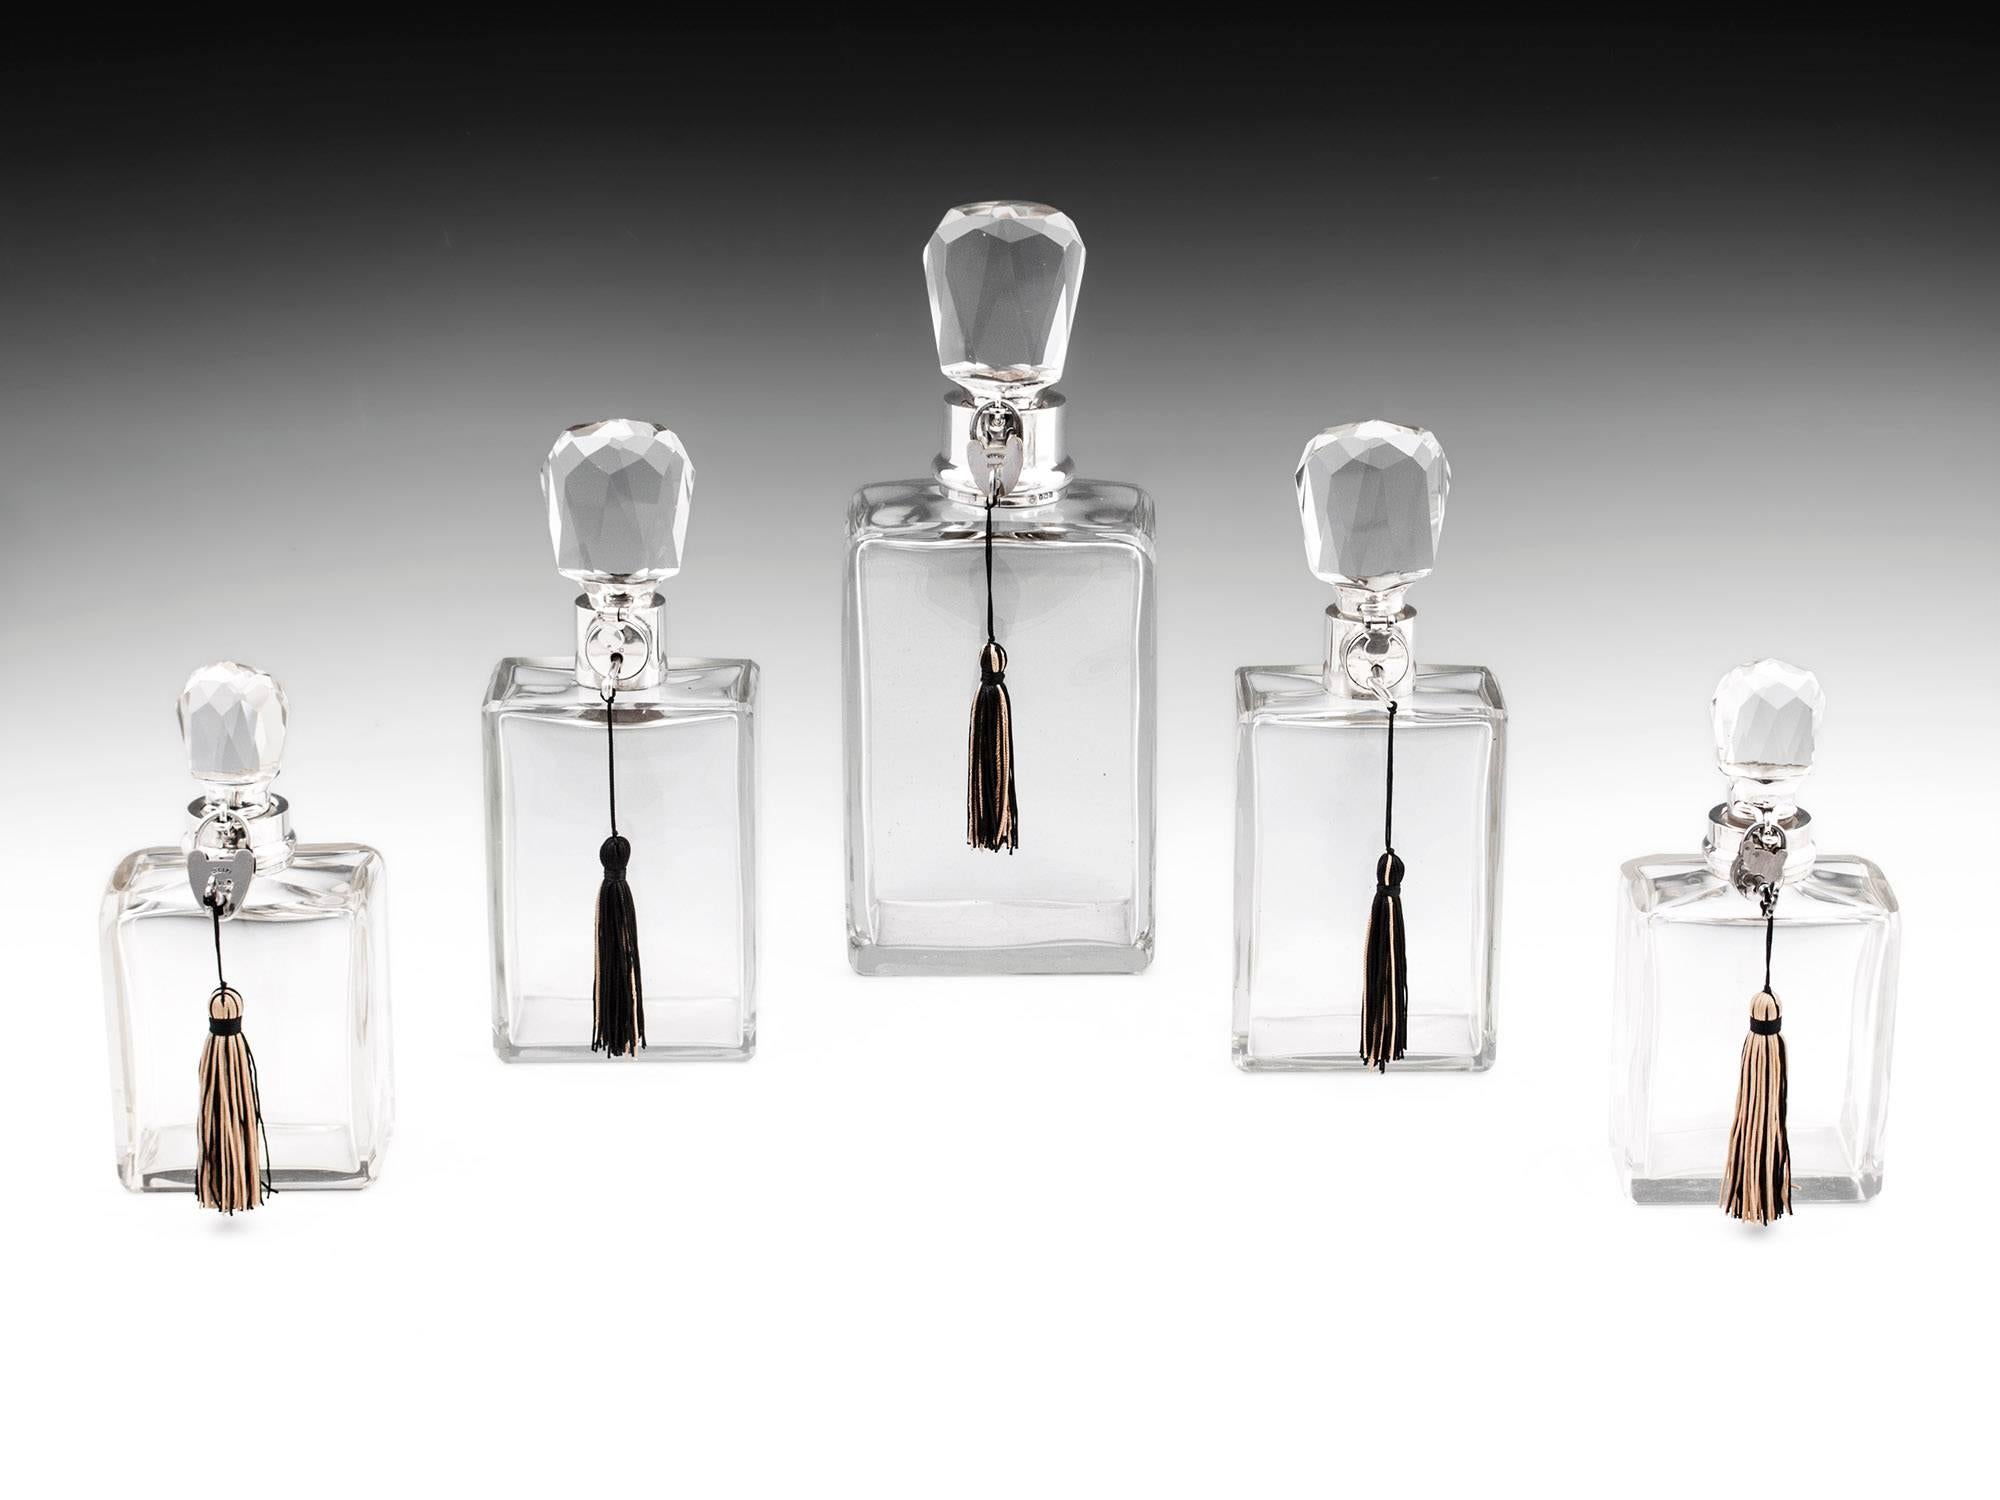 Art Deco silver collared lockable decanters in graduating sizes by silversmith Hukin & Heath. Extremely rare and simply stylish Art Deco decanters. Each one bearing the hallmarks for Hukin & Heath.

The large decanter which is silver